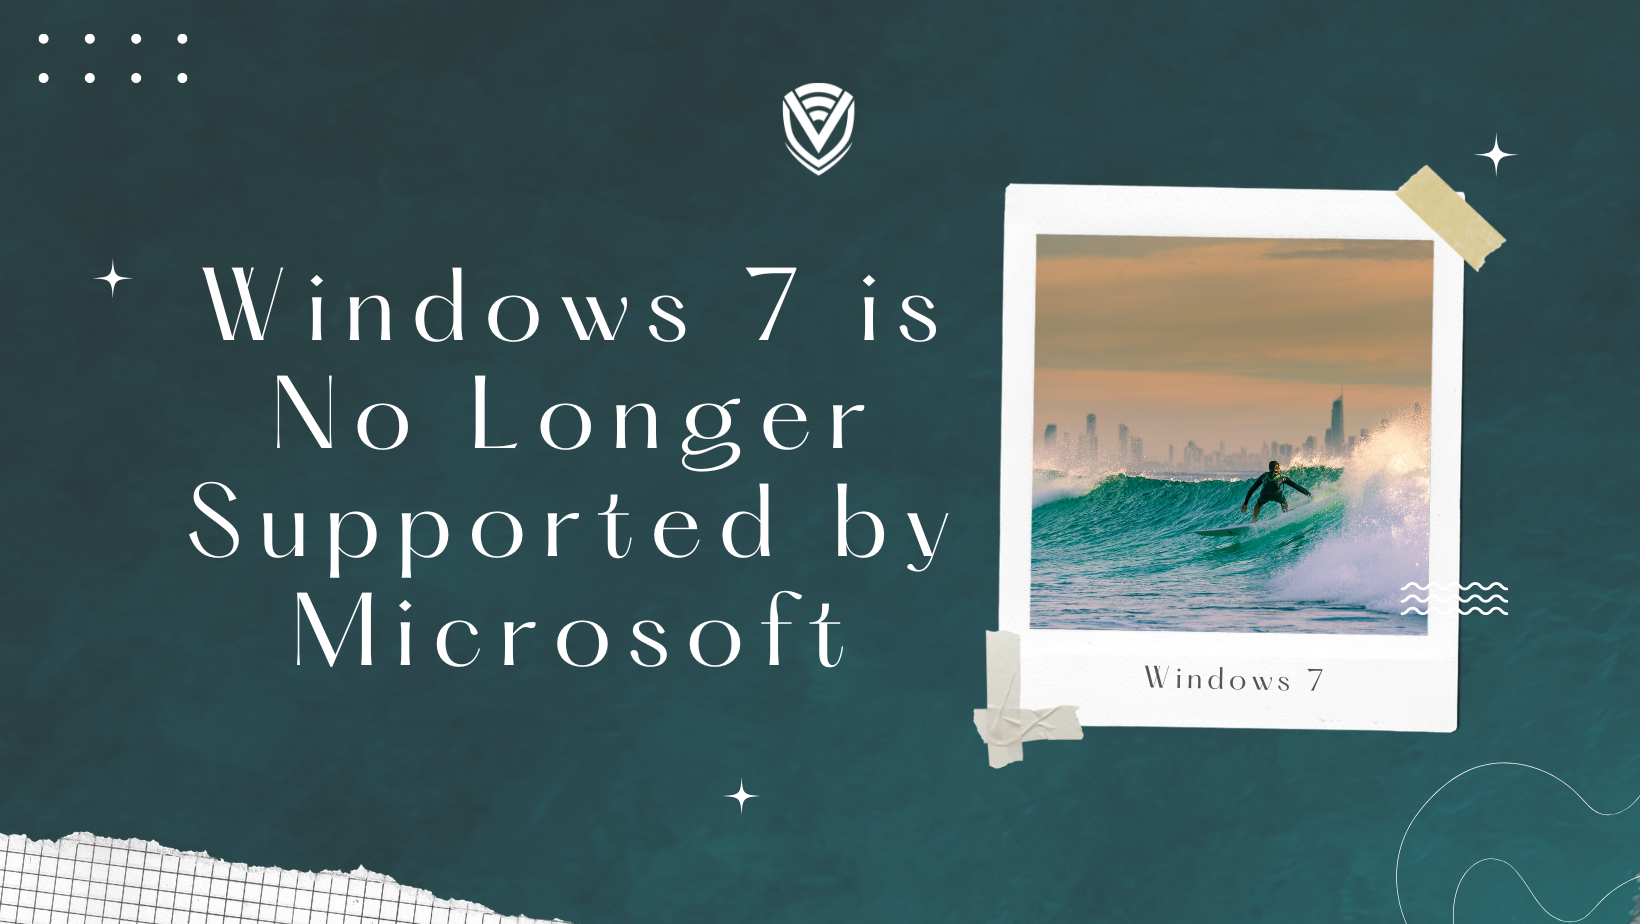 Windows 7 Is No Longer Supported by Microsoft